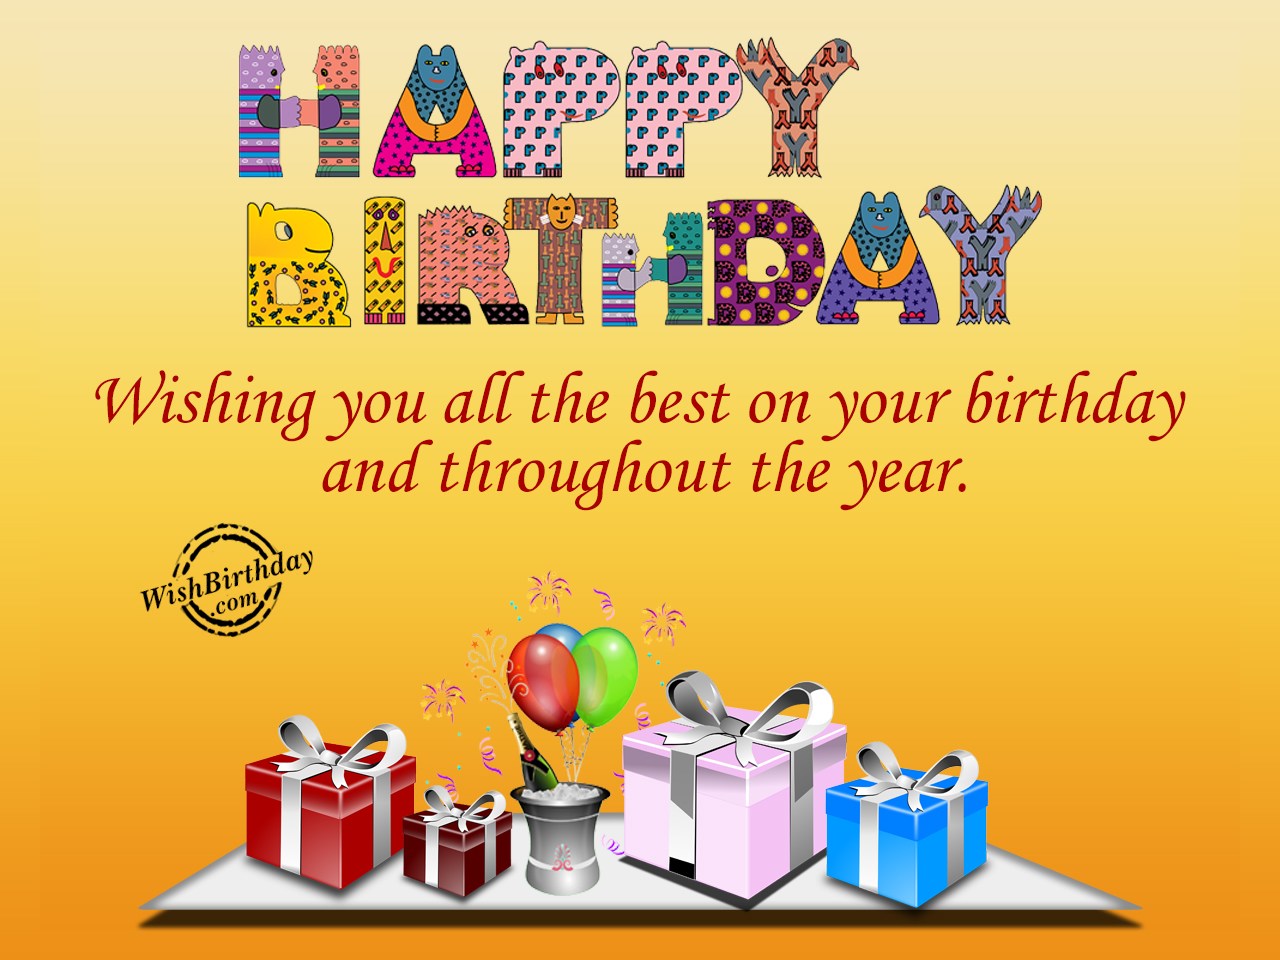 Wishing You All The Best On Your Birthday - WishBirthday.com